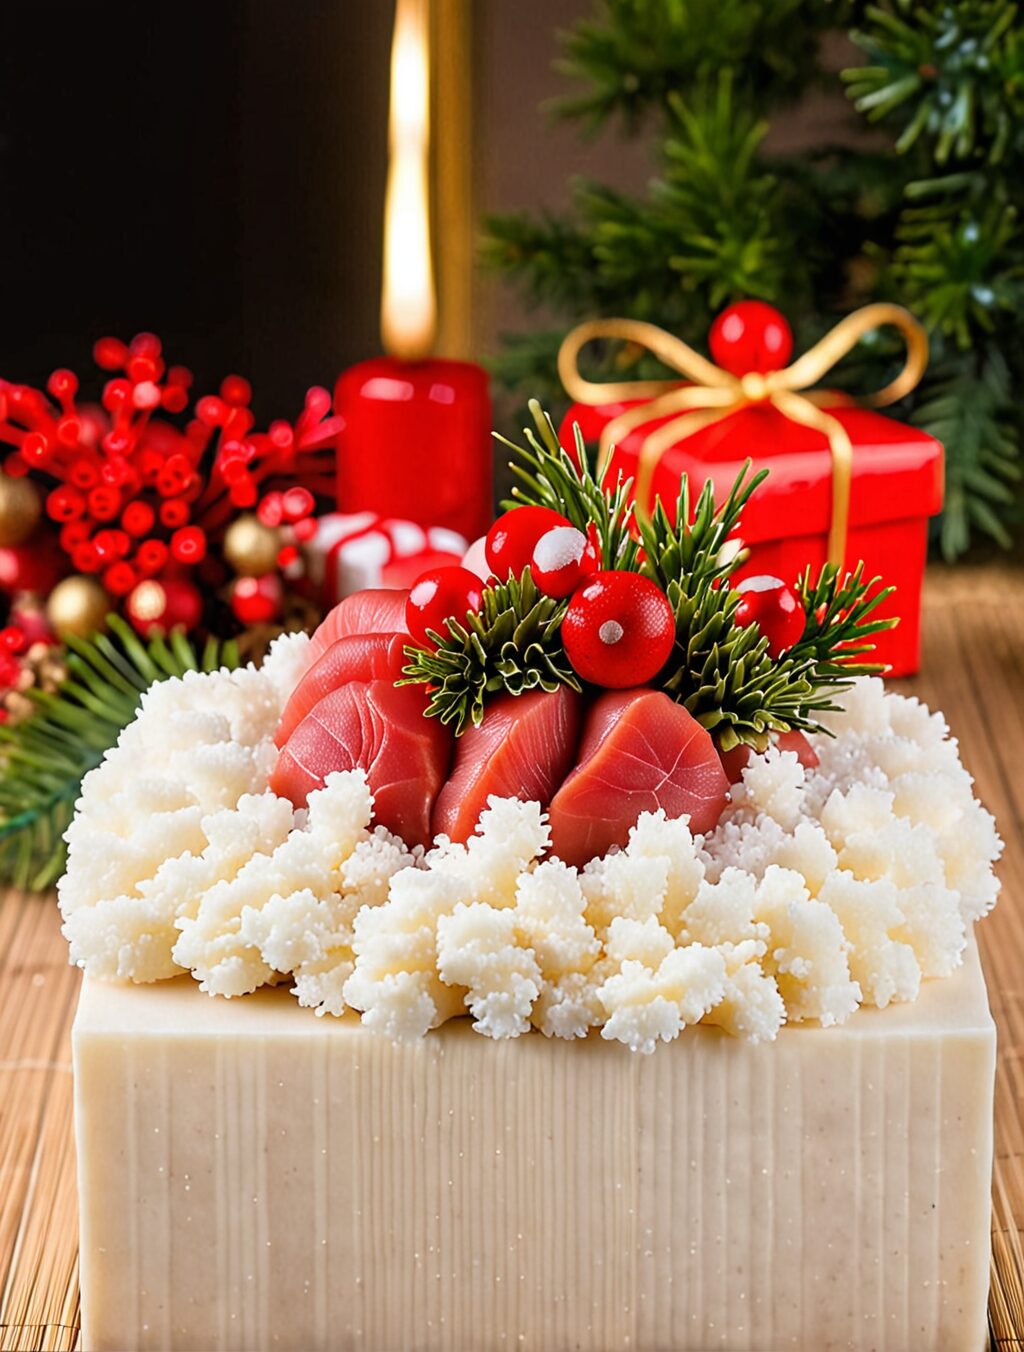 what do japan eat at christmas